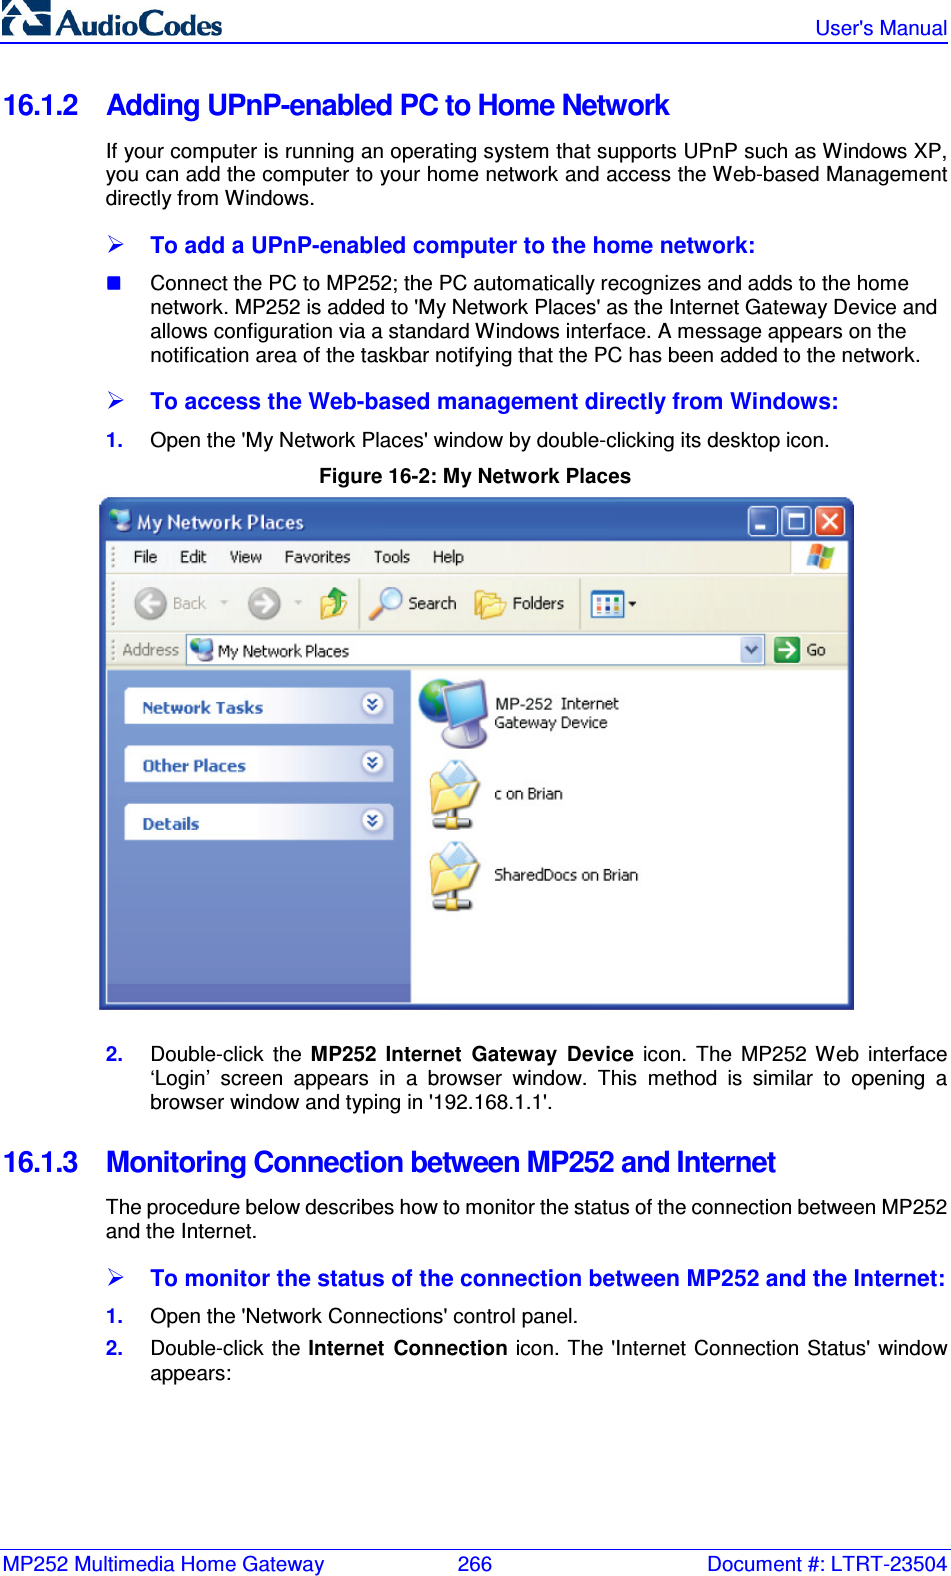 MP252 Multimedia Home Gateway  266  Document #: LTRT-23504   User&apos;s Manual  16.1.2  Adding UPnP-enabled PC to Home Network If your computer is running an operating system that supports UPnP such as Windows XP, you can add the computer to your home network and access the Web-based Management directly from Windows.  To add a UPnP-enabled computer to the home network:  Connect the PC to MP252; the PC automatically recognizes and adds to the home network. MP252 is added to &apos;My Network Places&apos; as the Internet Gateway Device and allows configuration via a standard Windows interface. A message appears on the notification area of the taskbar notifying that the PC has been added to the network.  To access the Web-based management directly from Windows: 1.  Open the &apos;My Network Places&apos; window by double-clicking its desktop icon.  Figure 16-2: My Network Places  2.  Double-click  the  MP252 Internet  Gateway  Device  icon.  The  MP252  Web  interface ‘Login’  screen  appears  in  a  browser  window.  This  method  is  similar  to  opening  a browser window and typing in &apos;192.168.1.1&apos;. 16.1.3  Monitoring Connection between MP252 and Internet The procedure below describes how to monitor the status of the connection between MP252 and the Internet.  To monitor the status of the connection between MP252 and the Internet: 1.  Open the &apos;Network Connections&apos; control panel. 2.  Double-click the Internet  Connection icon. The &apos;Internet Connection  Status&apos; window appears: 